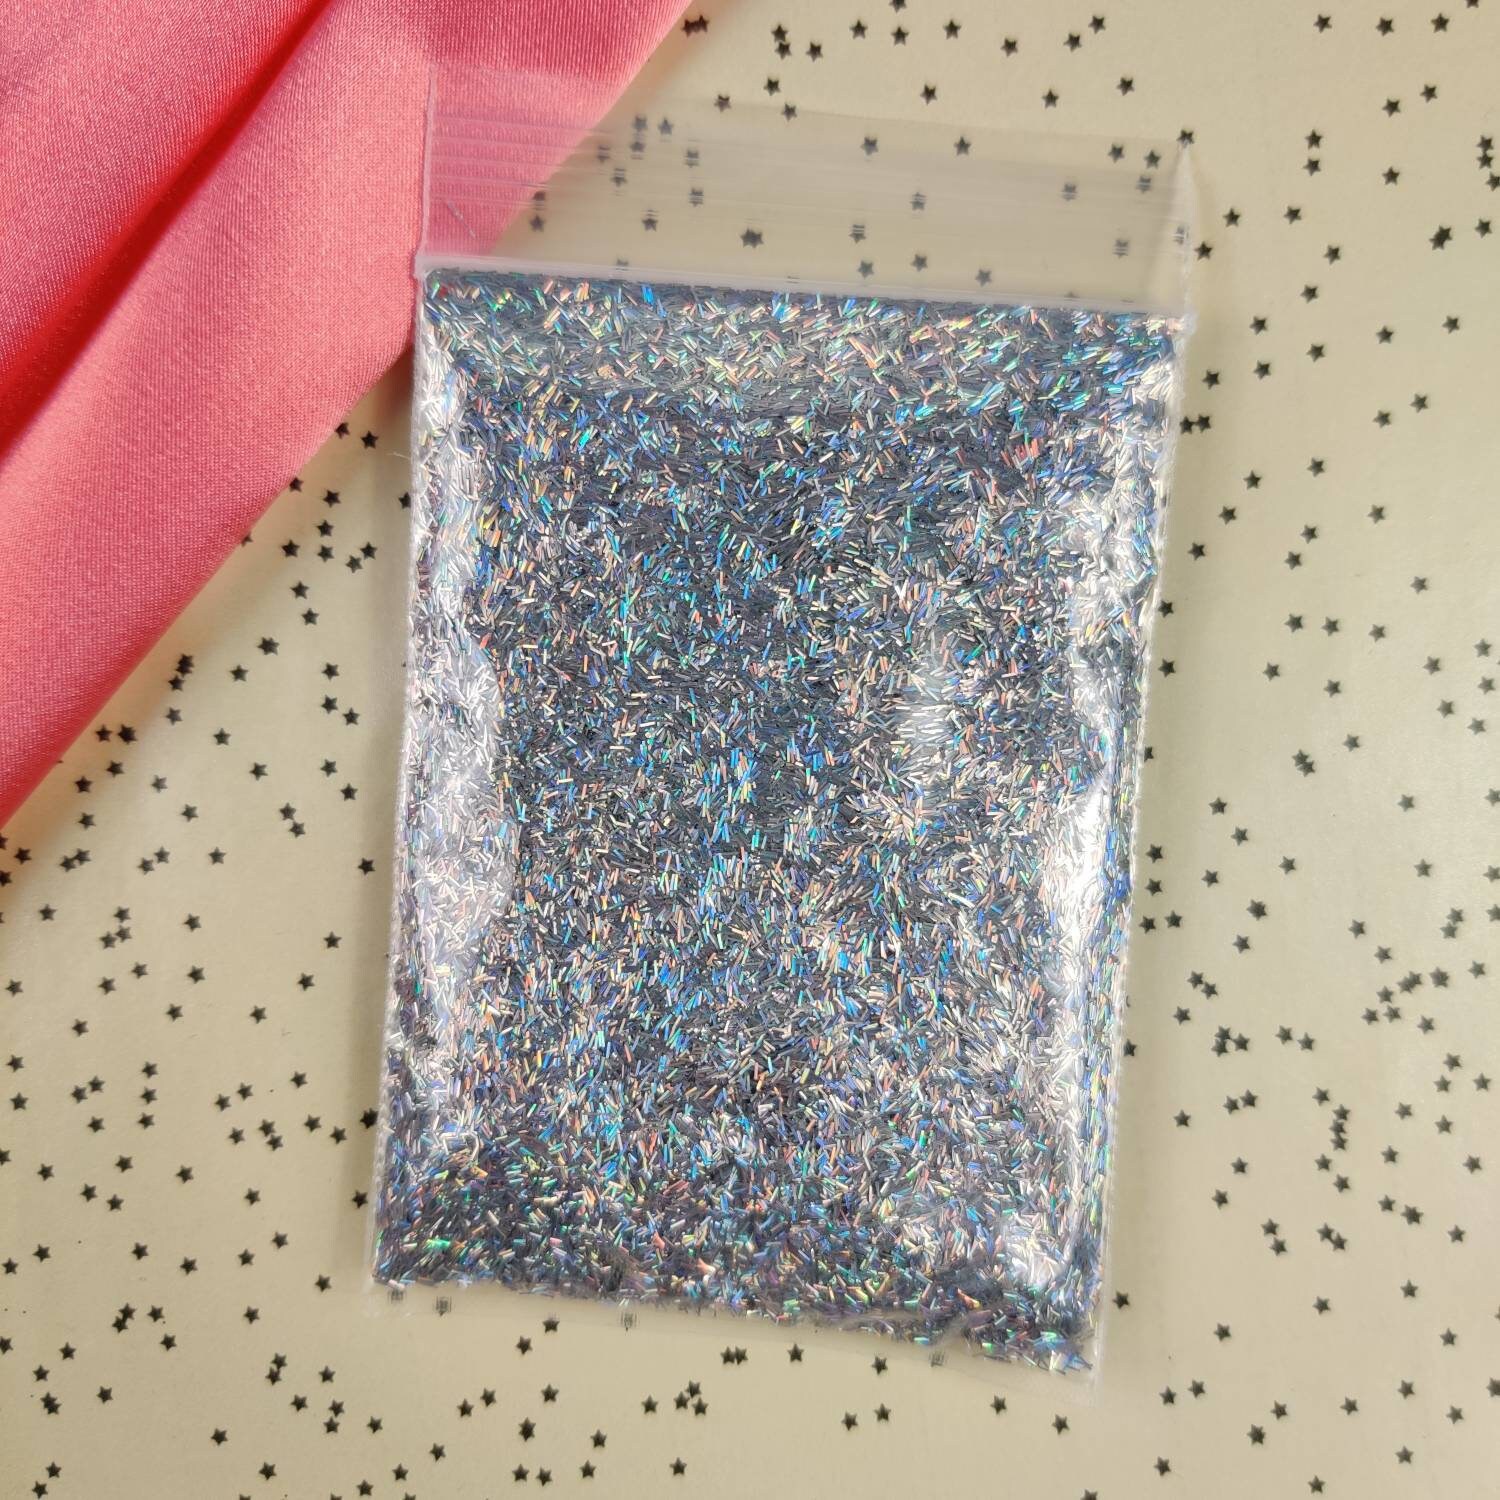 TINSEL Silver Holographic Fine Glitter Christmas Holiday Holo